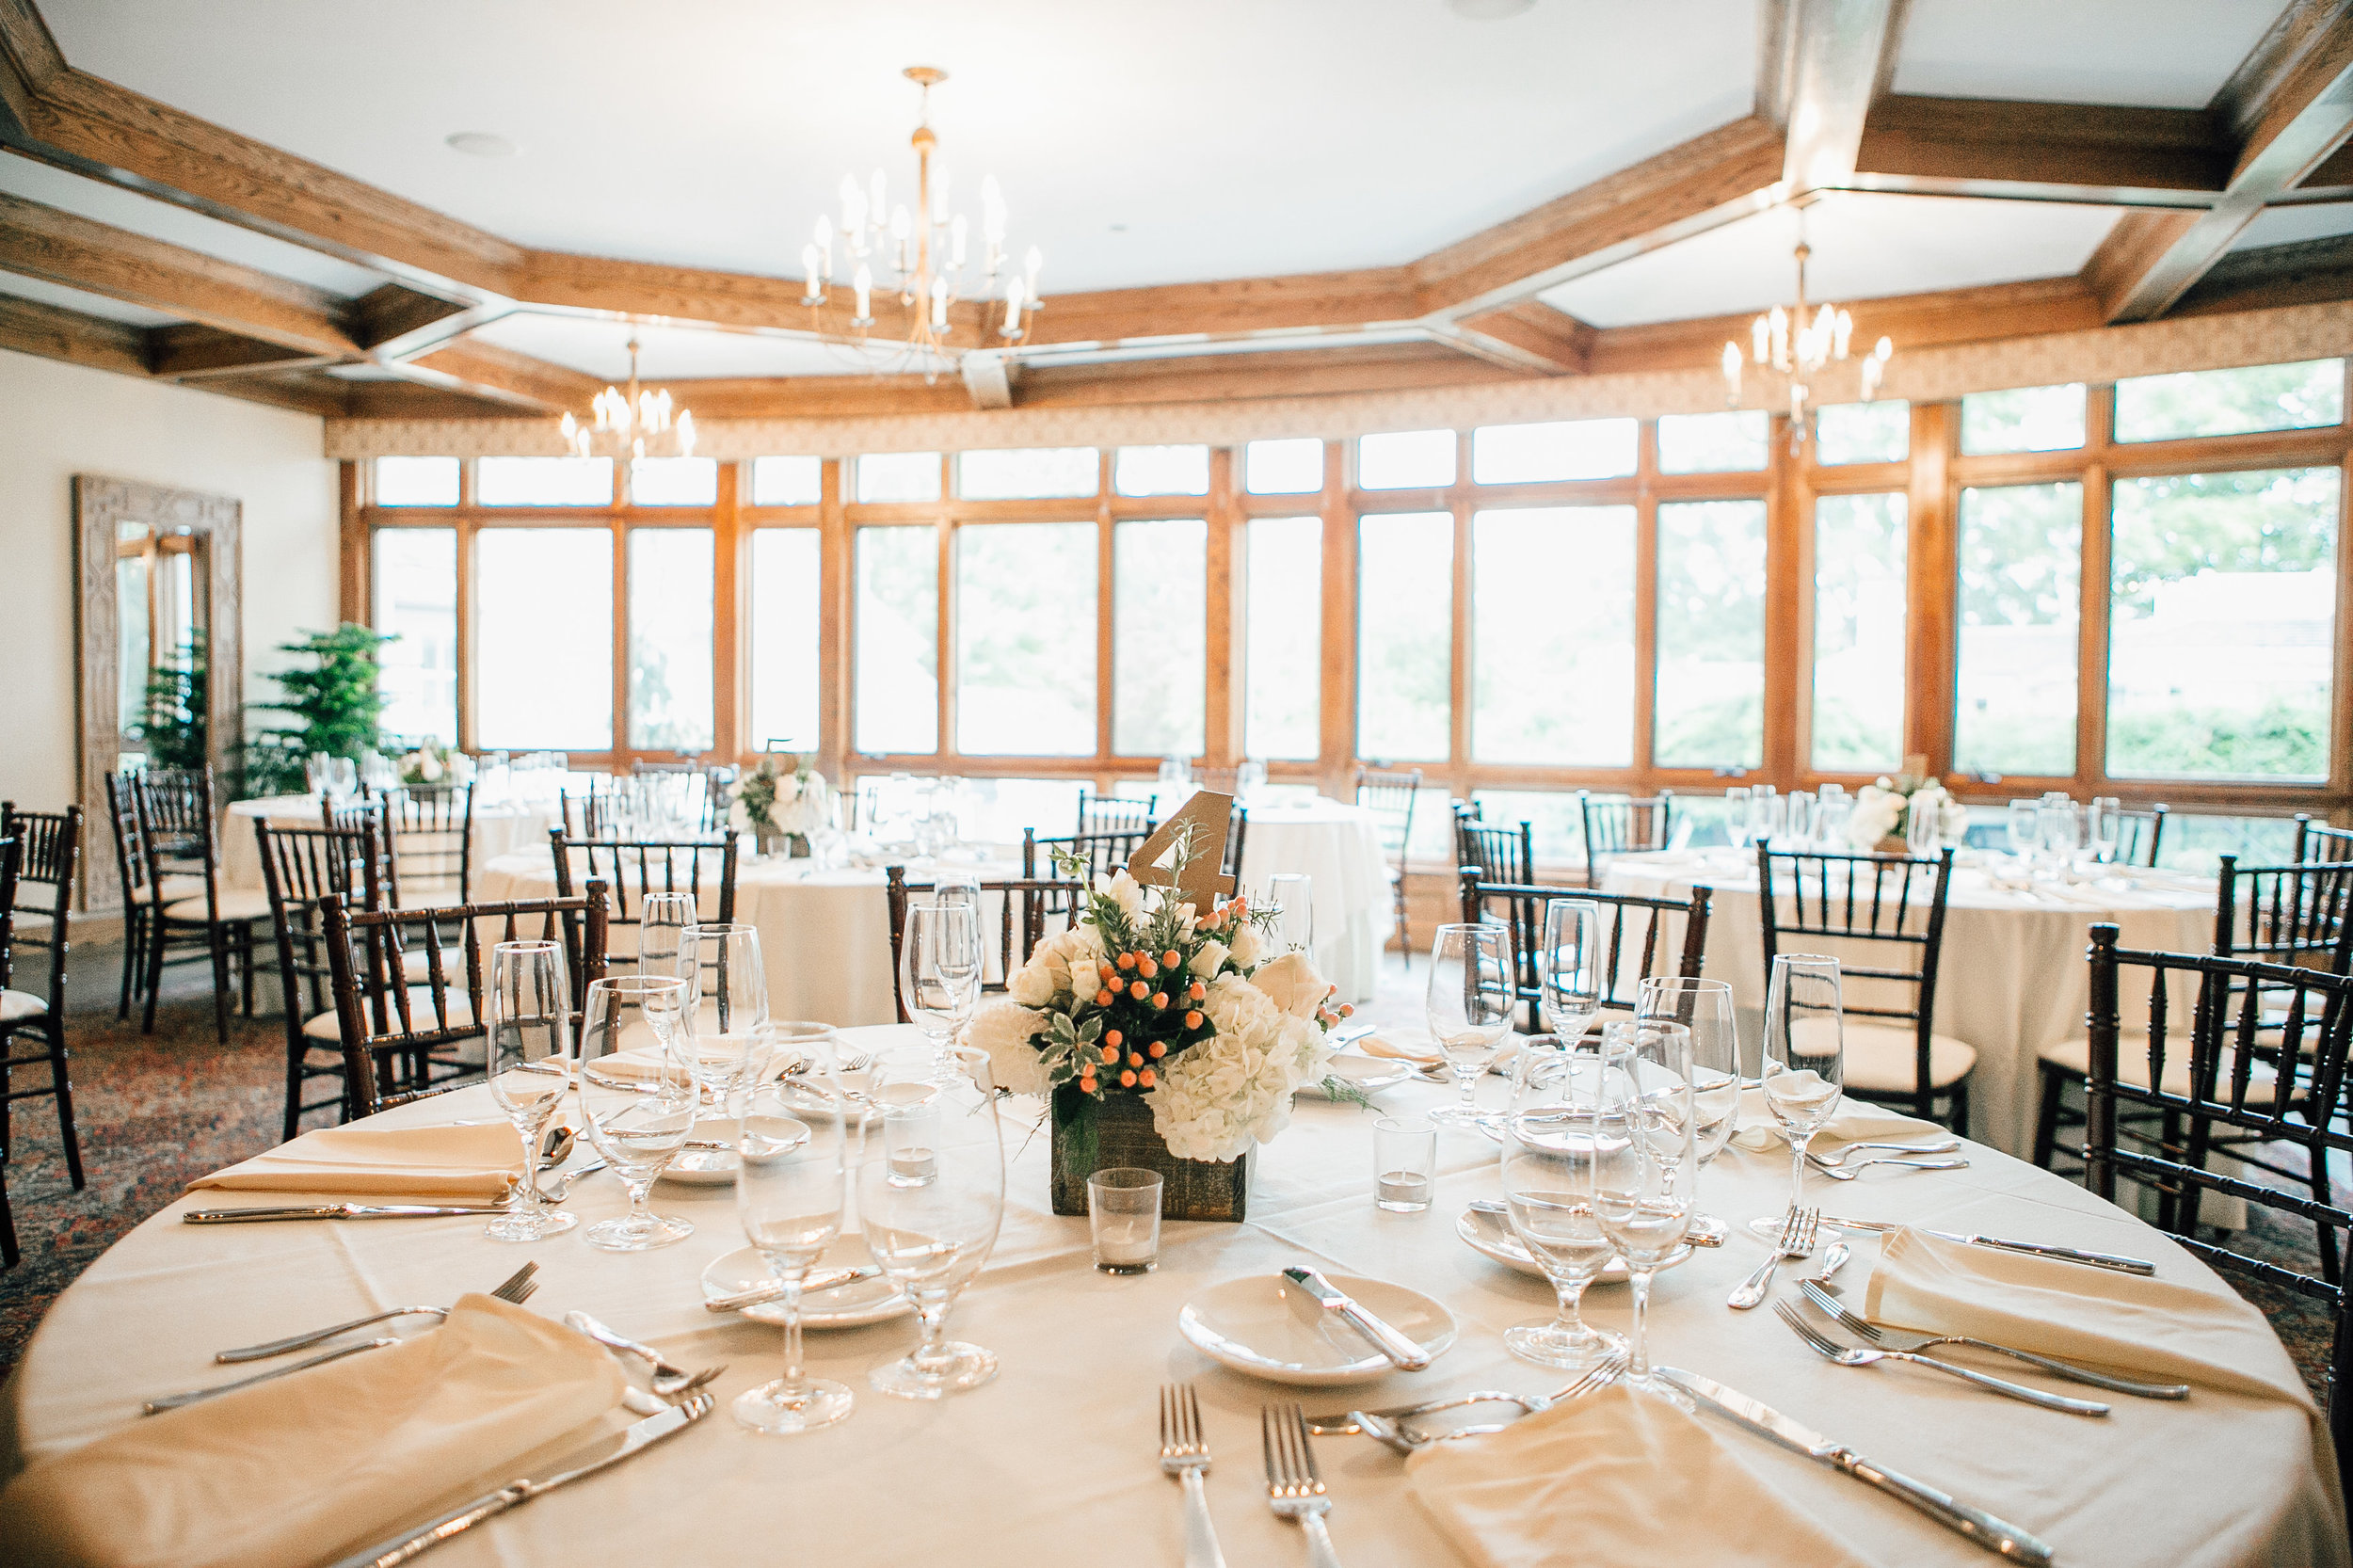   The Bedford Village Inn. Photo by Emily Tebbetts Photography.  